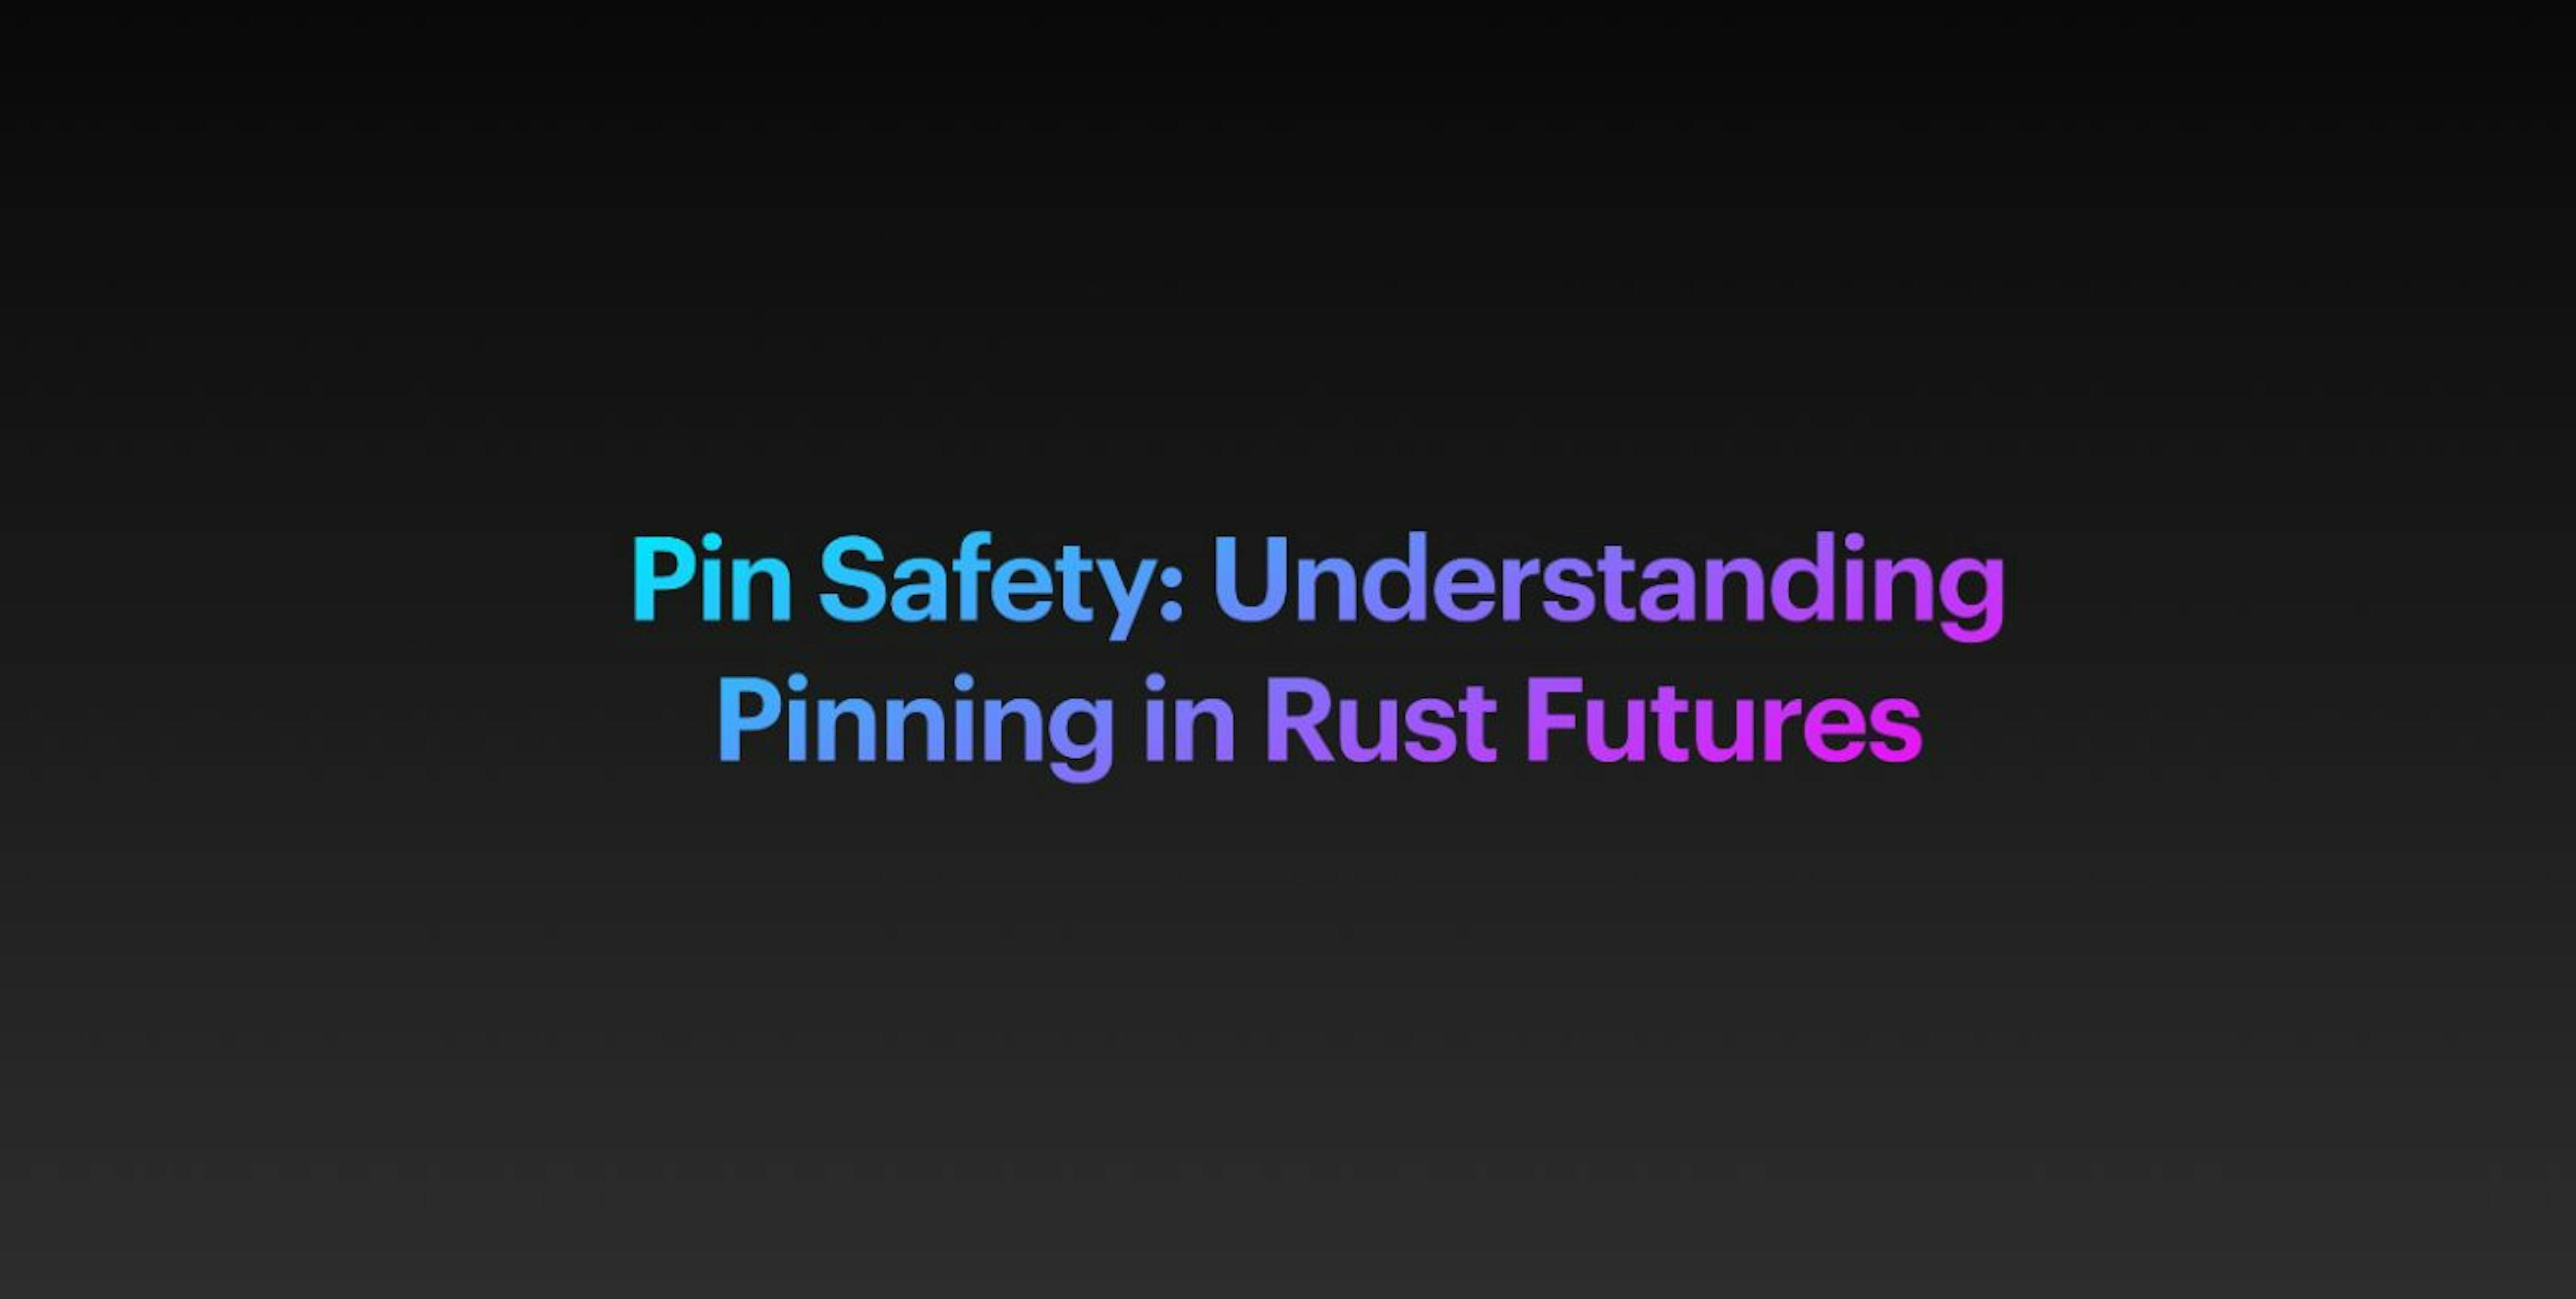 featured image - Pin Safety: Understanding Pinning in Rust Futures